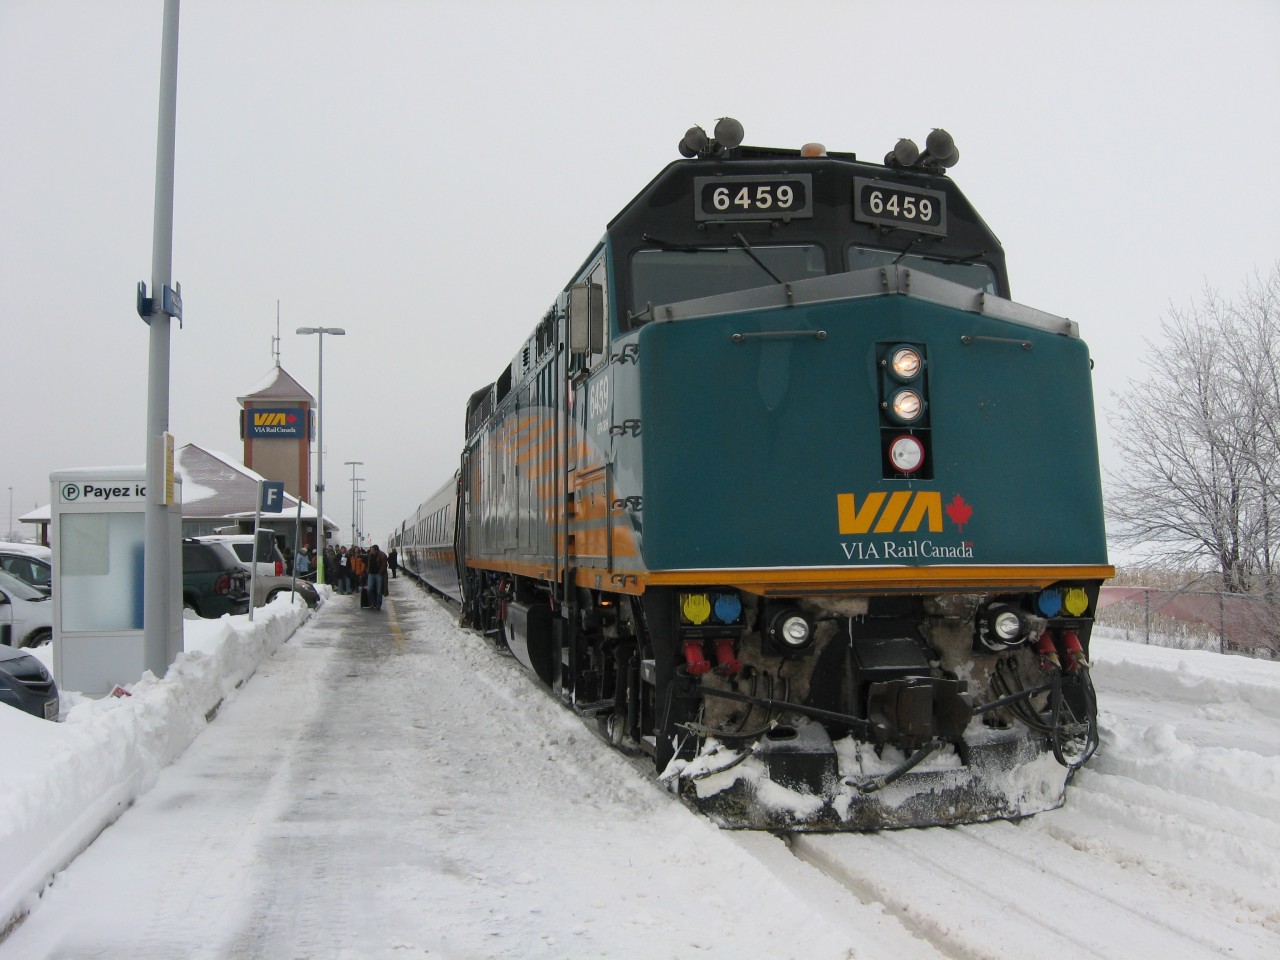 I had made a promise to my Father-in-Law back in 2001 that if we were ever together again in a Canadian city with VIA Rail service that I would treat him to a train ride. He had never experienced rail travel on the Mainland, and his last trip was a a return run from Gambo to Corner Brook on Newfoundland's famed 'Caribou' as a teenager in the 1950's. A surprise Christmas visit to spend the holidays with my Sister-in-Law in December 2013, unbeknown to him who had arrived the week before, gave me an opportunity to fulfil that promise made some 12 years earlier. Prior to boarding VIA Rail # 73 to Montreal at Fallowfield, I took the opportunity to capture a pristine 6459 in the new Renaissance paint scheme. With my youngest son Thomas accompanying us, we had a most memorable and enjoyable trip, with the VIA crews going out of their way to pay special attention to 'Johnny' on his first VIA trip! An added bonus was the revelation made to me upon my return by eminent railway photographer James A. Brown that the 6459 was the former 6403, the same lead engine on Canada's new polymer $10 bill! Coincidentally, only a month prior, I was fortunate to have be chosen by the Bank of Canada as the guest speaker for the Newfoundland and Labrador portion of its simultaneous National roll-out.